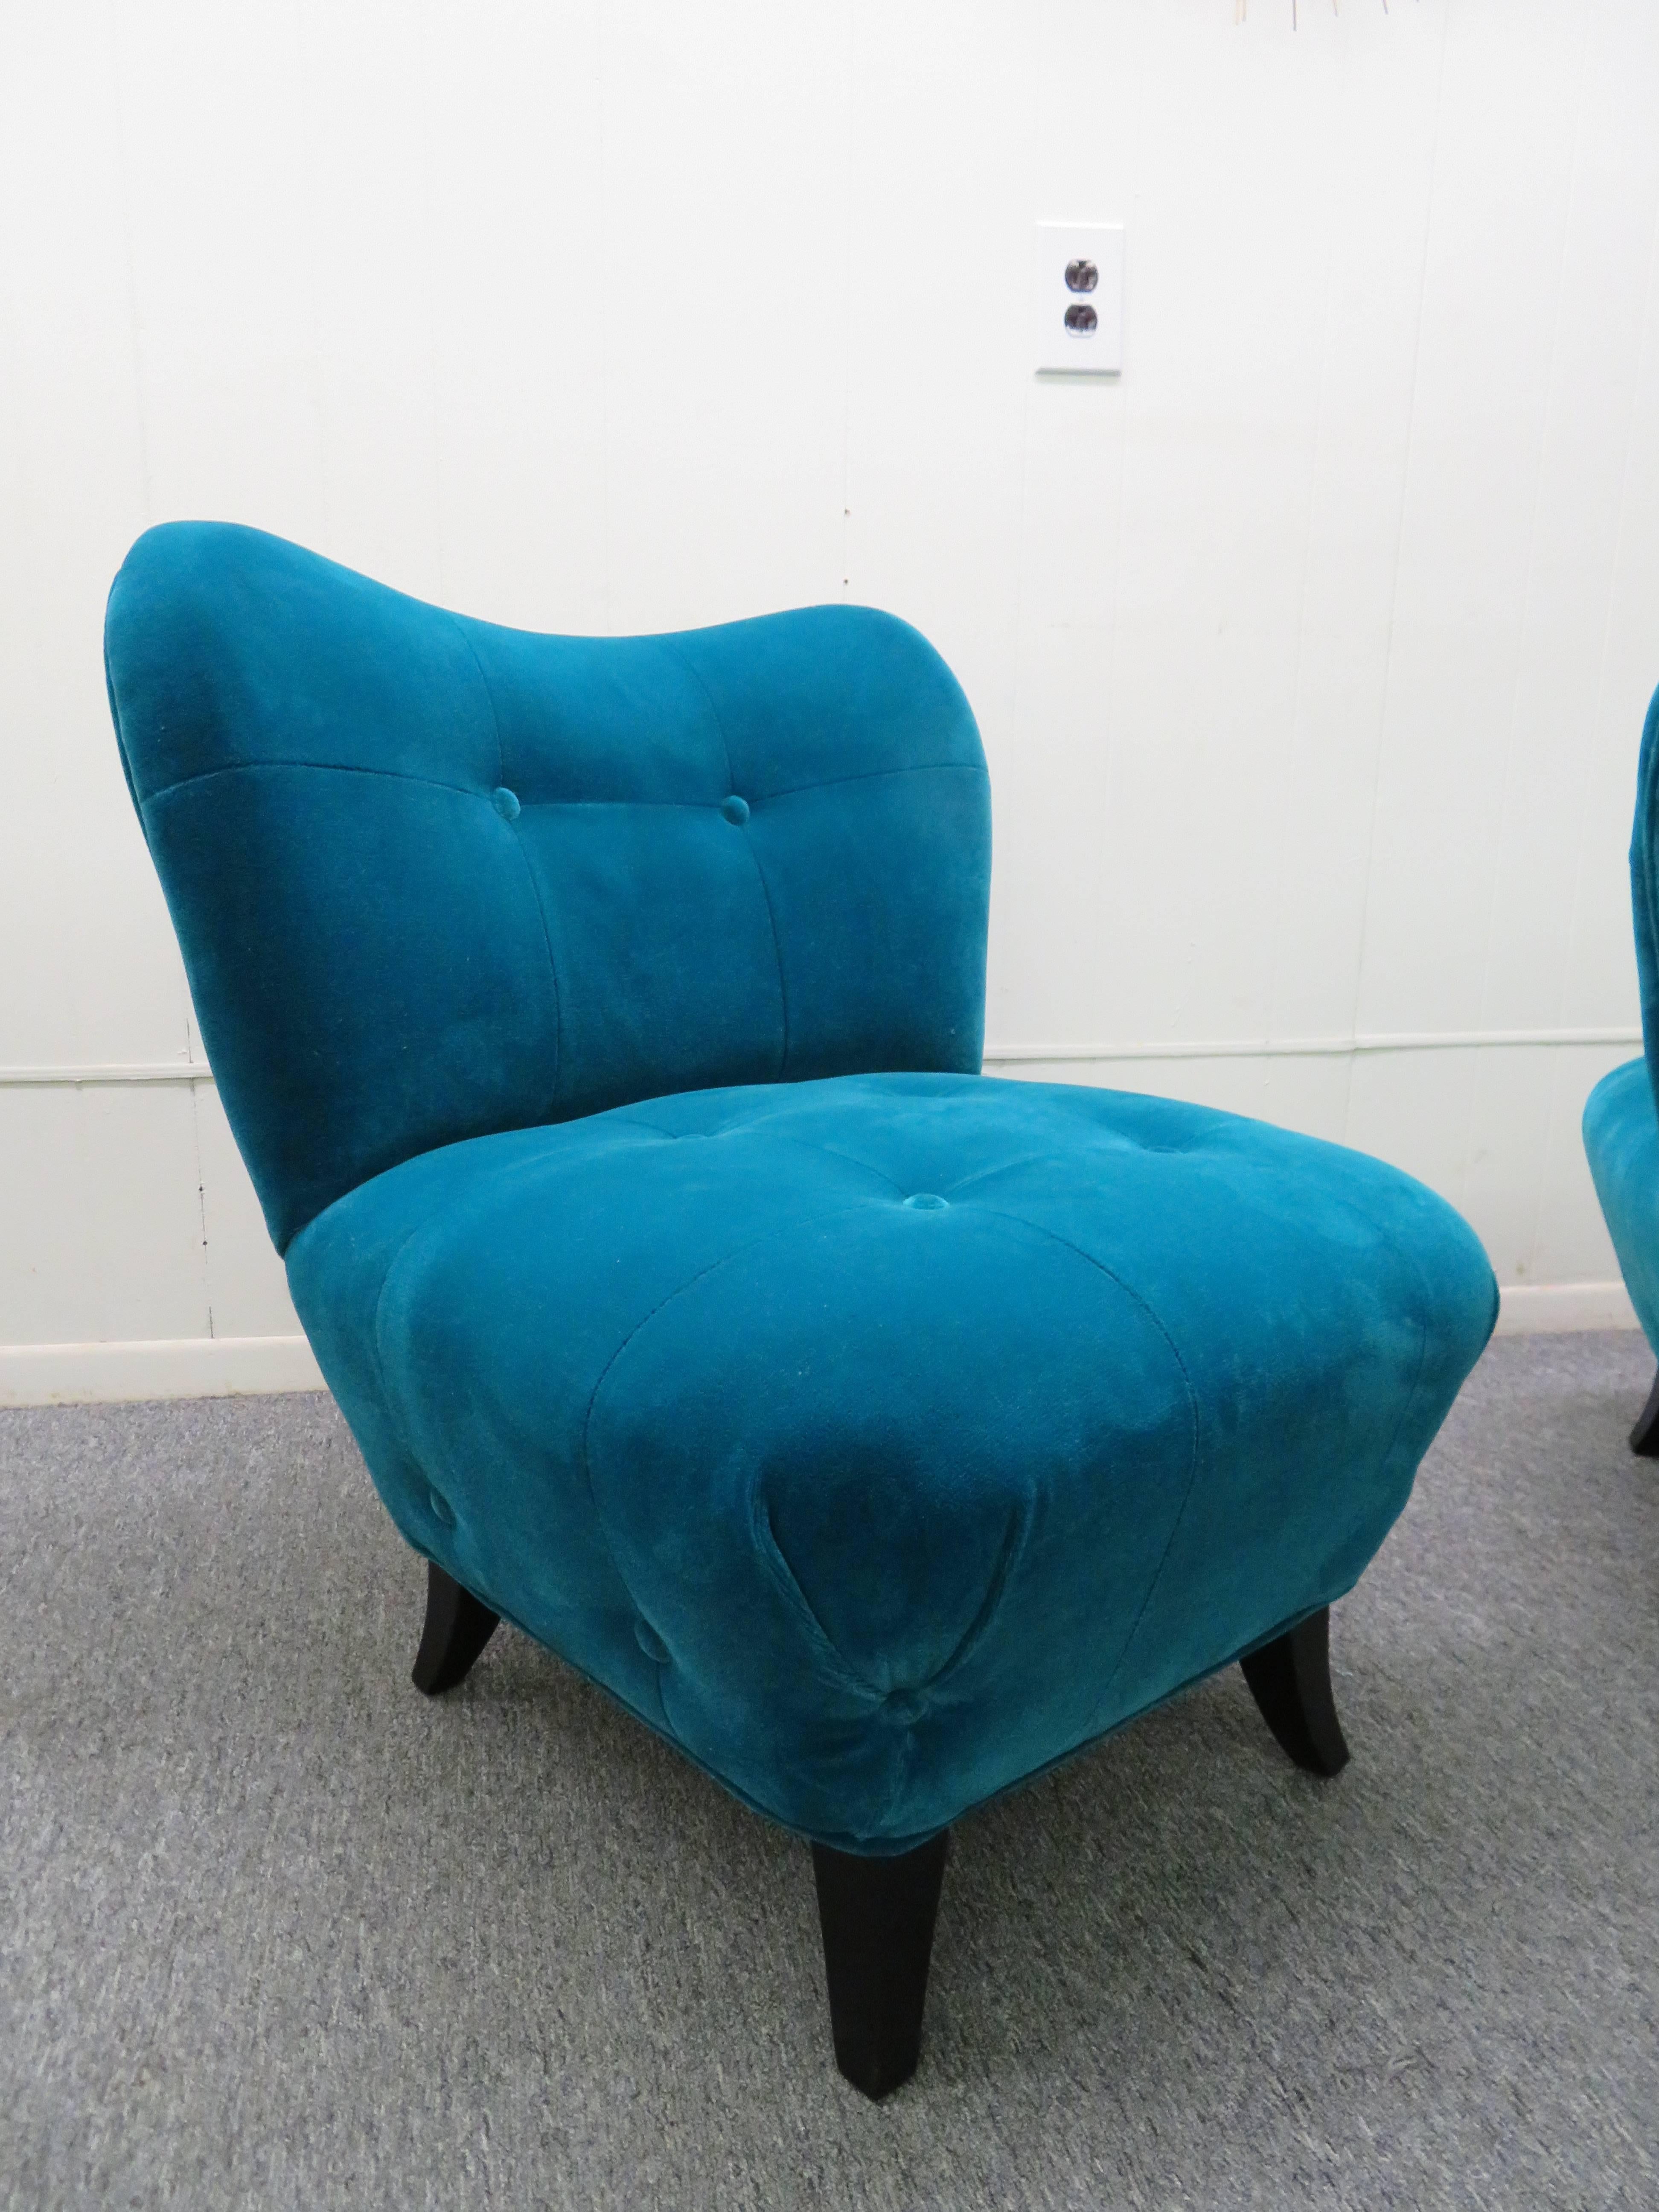 Excellent Pair of Gilbert Rohde Style Mohair Slipper Chairs, Mid-Century Modern For Sale 3